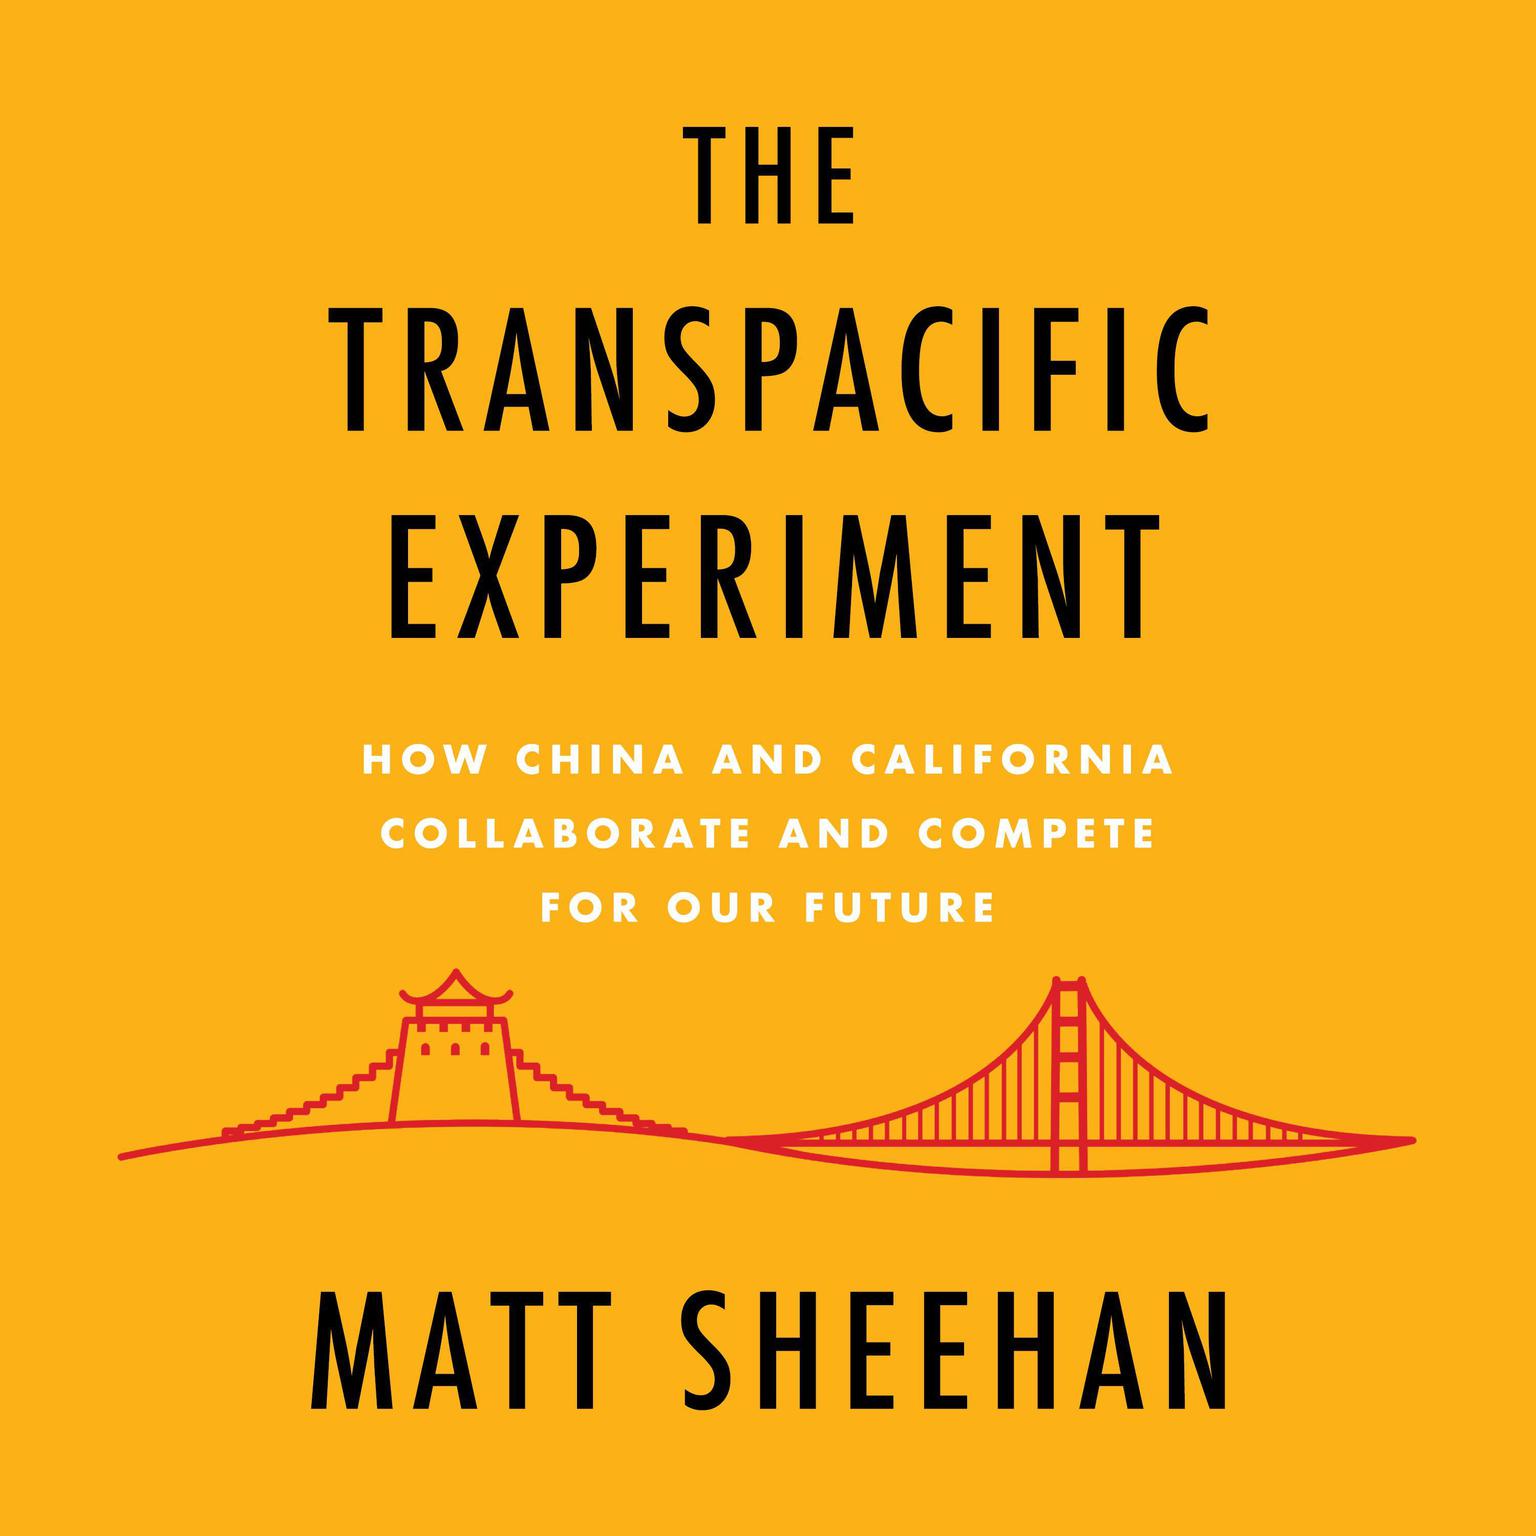 The Transpacific Experiment: How China and California Collaborate and Compete for Our Future Audiobook, by Matt Sheehan